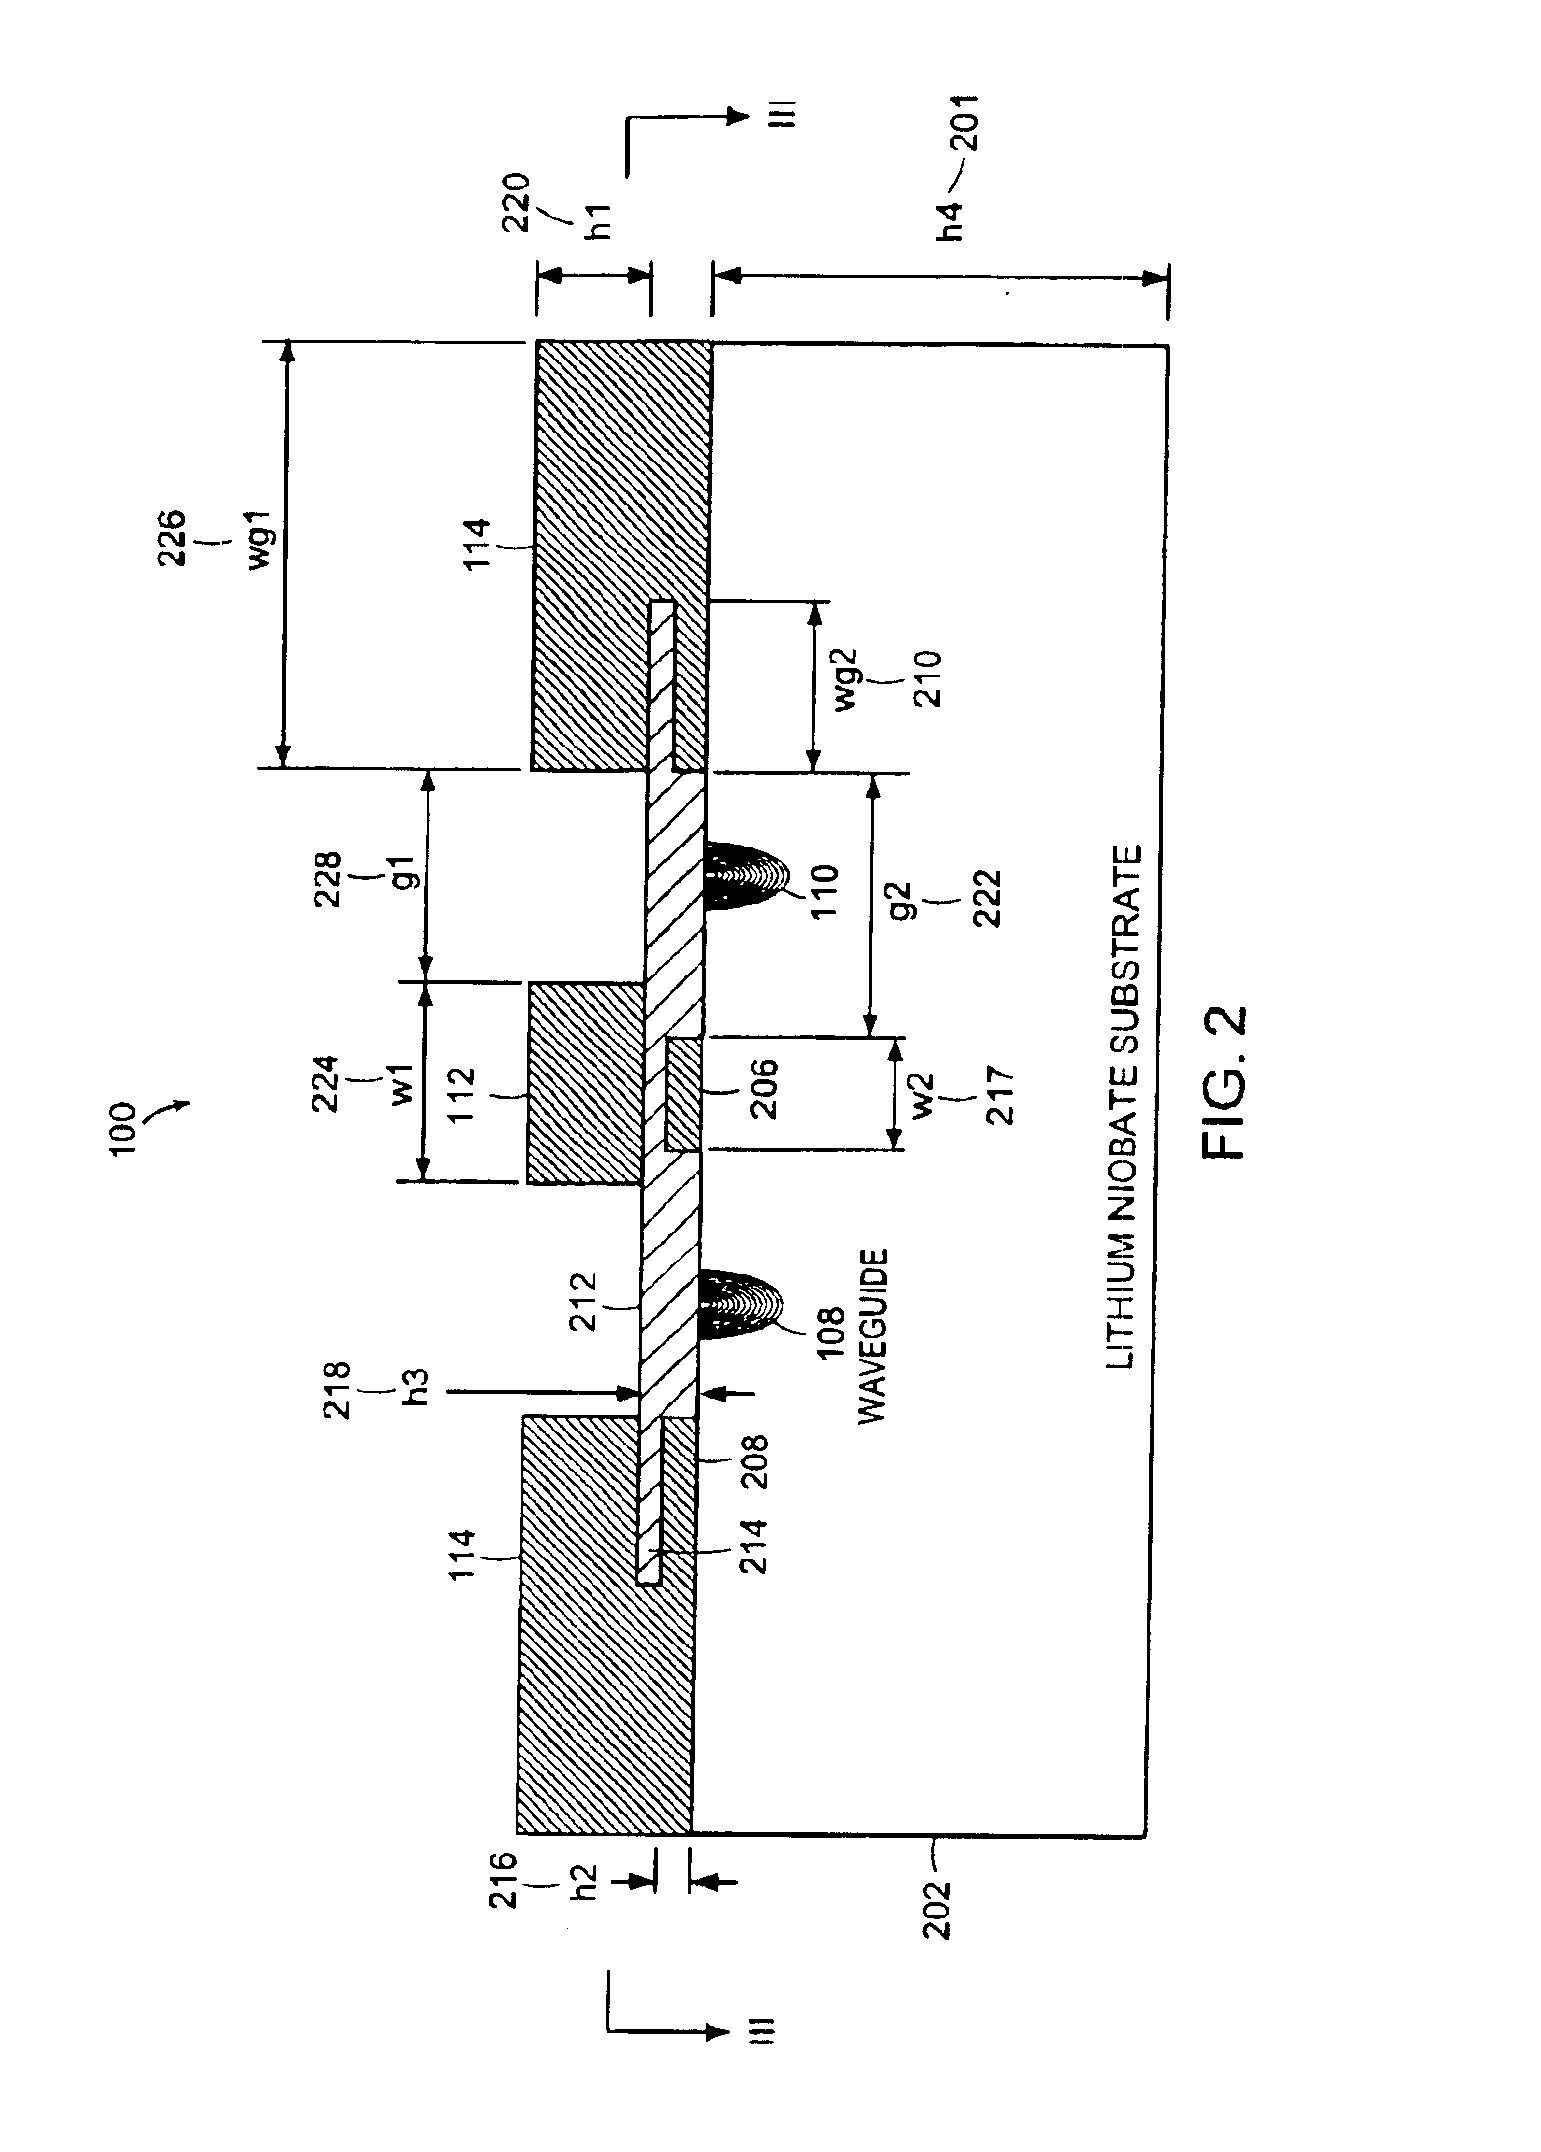 Suppression of high frequency resonance in an electro-optical modulator